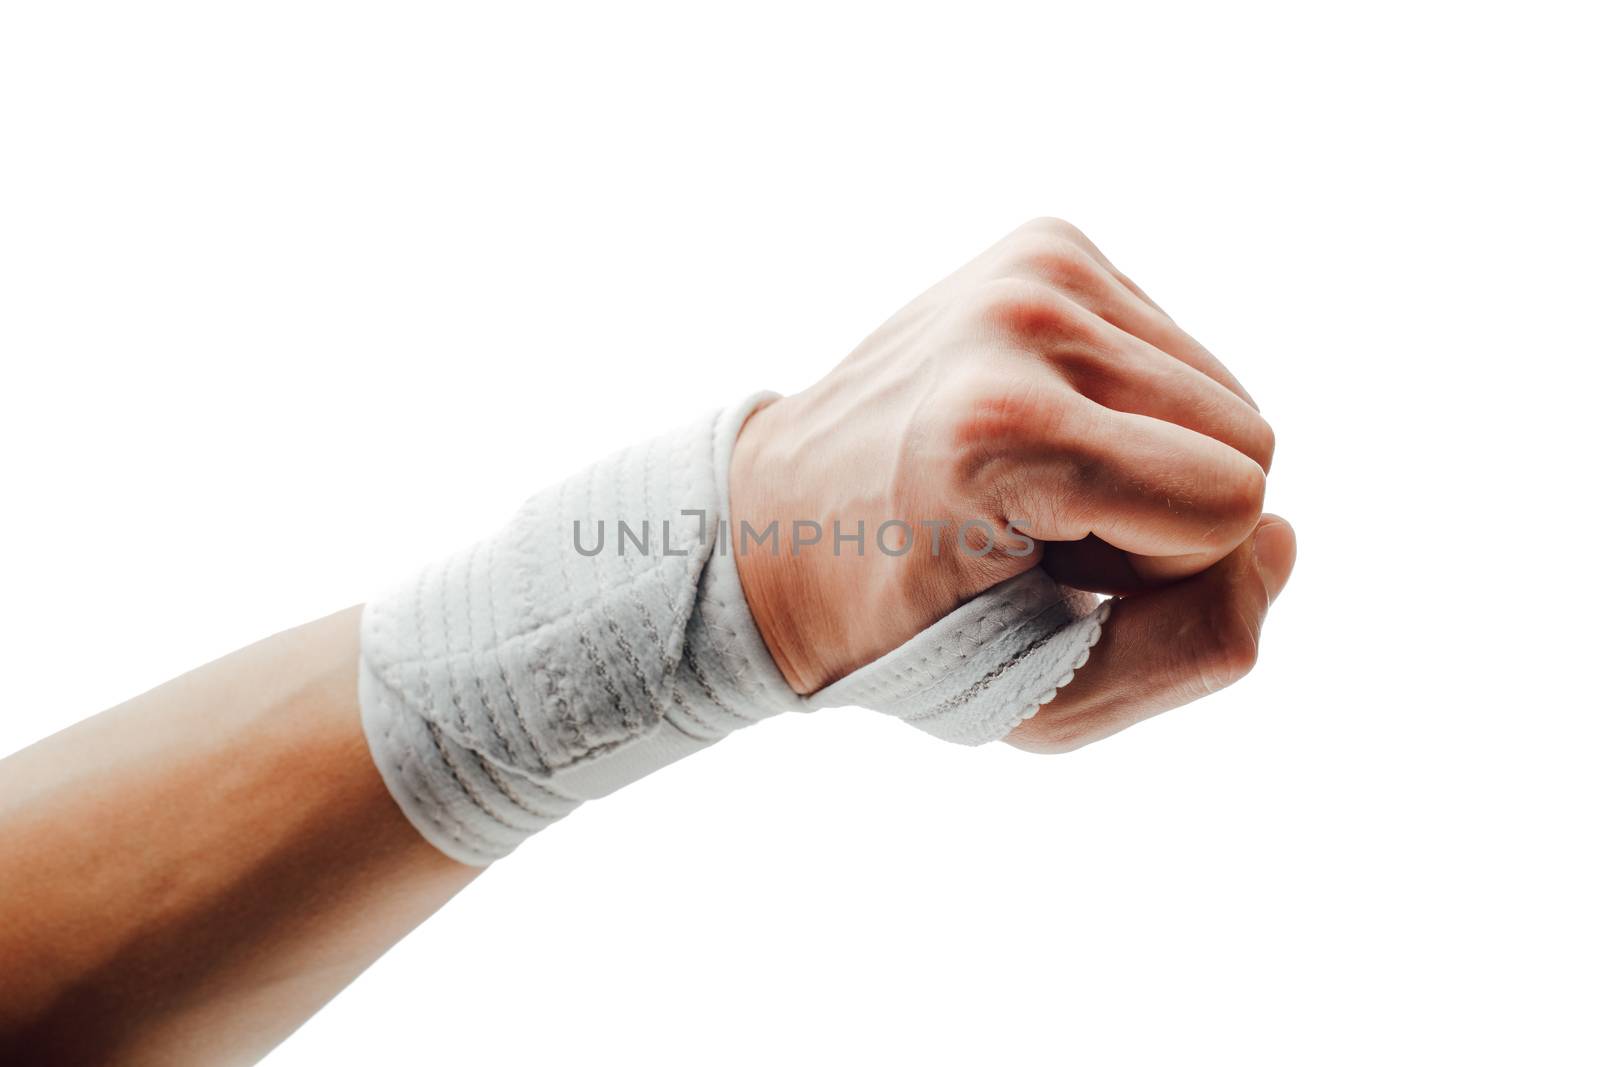 wrist and hand orthotics support for carpal tunnel syndrome healing, isolated on white